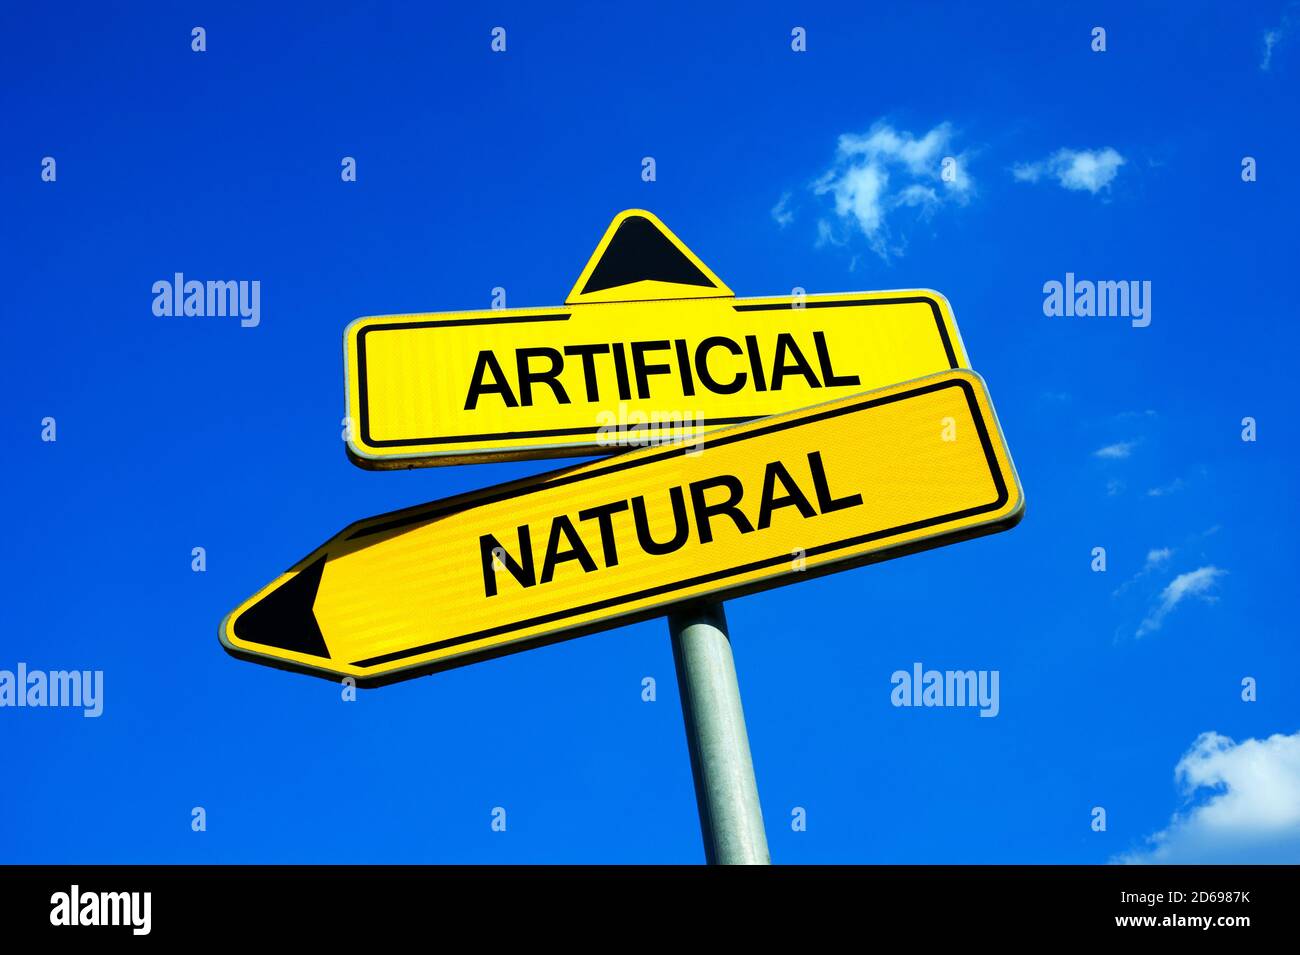 Artificial or Natural - Traffic sign with two options - product created by nature vs thing manufactured, constructed and modified synthetically by man Stock Photo